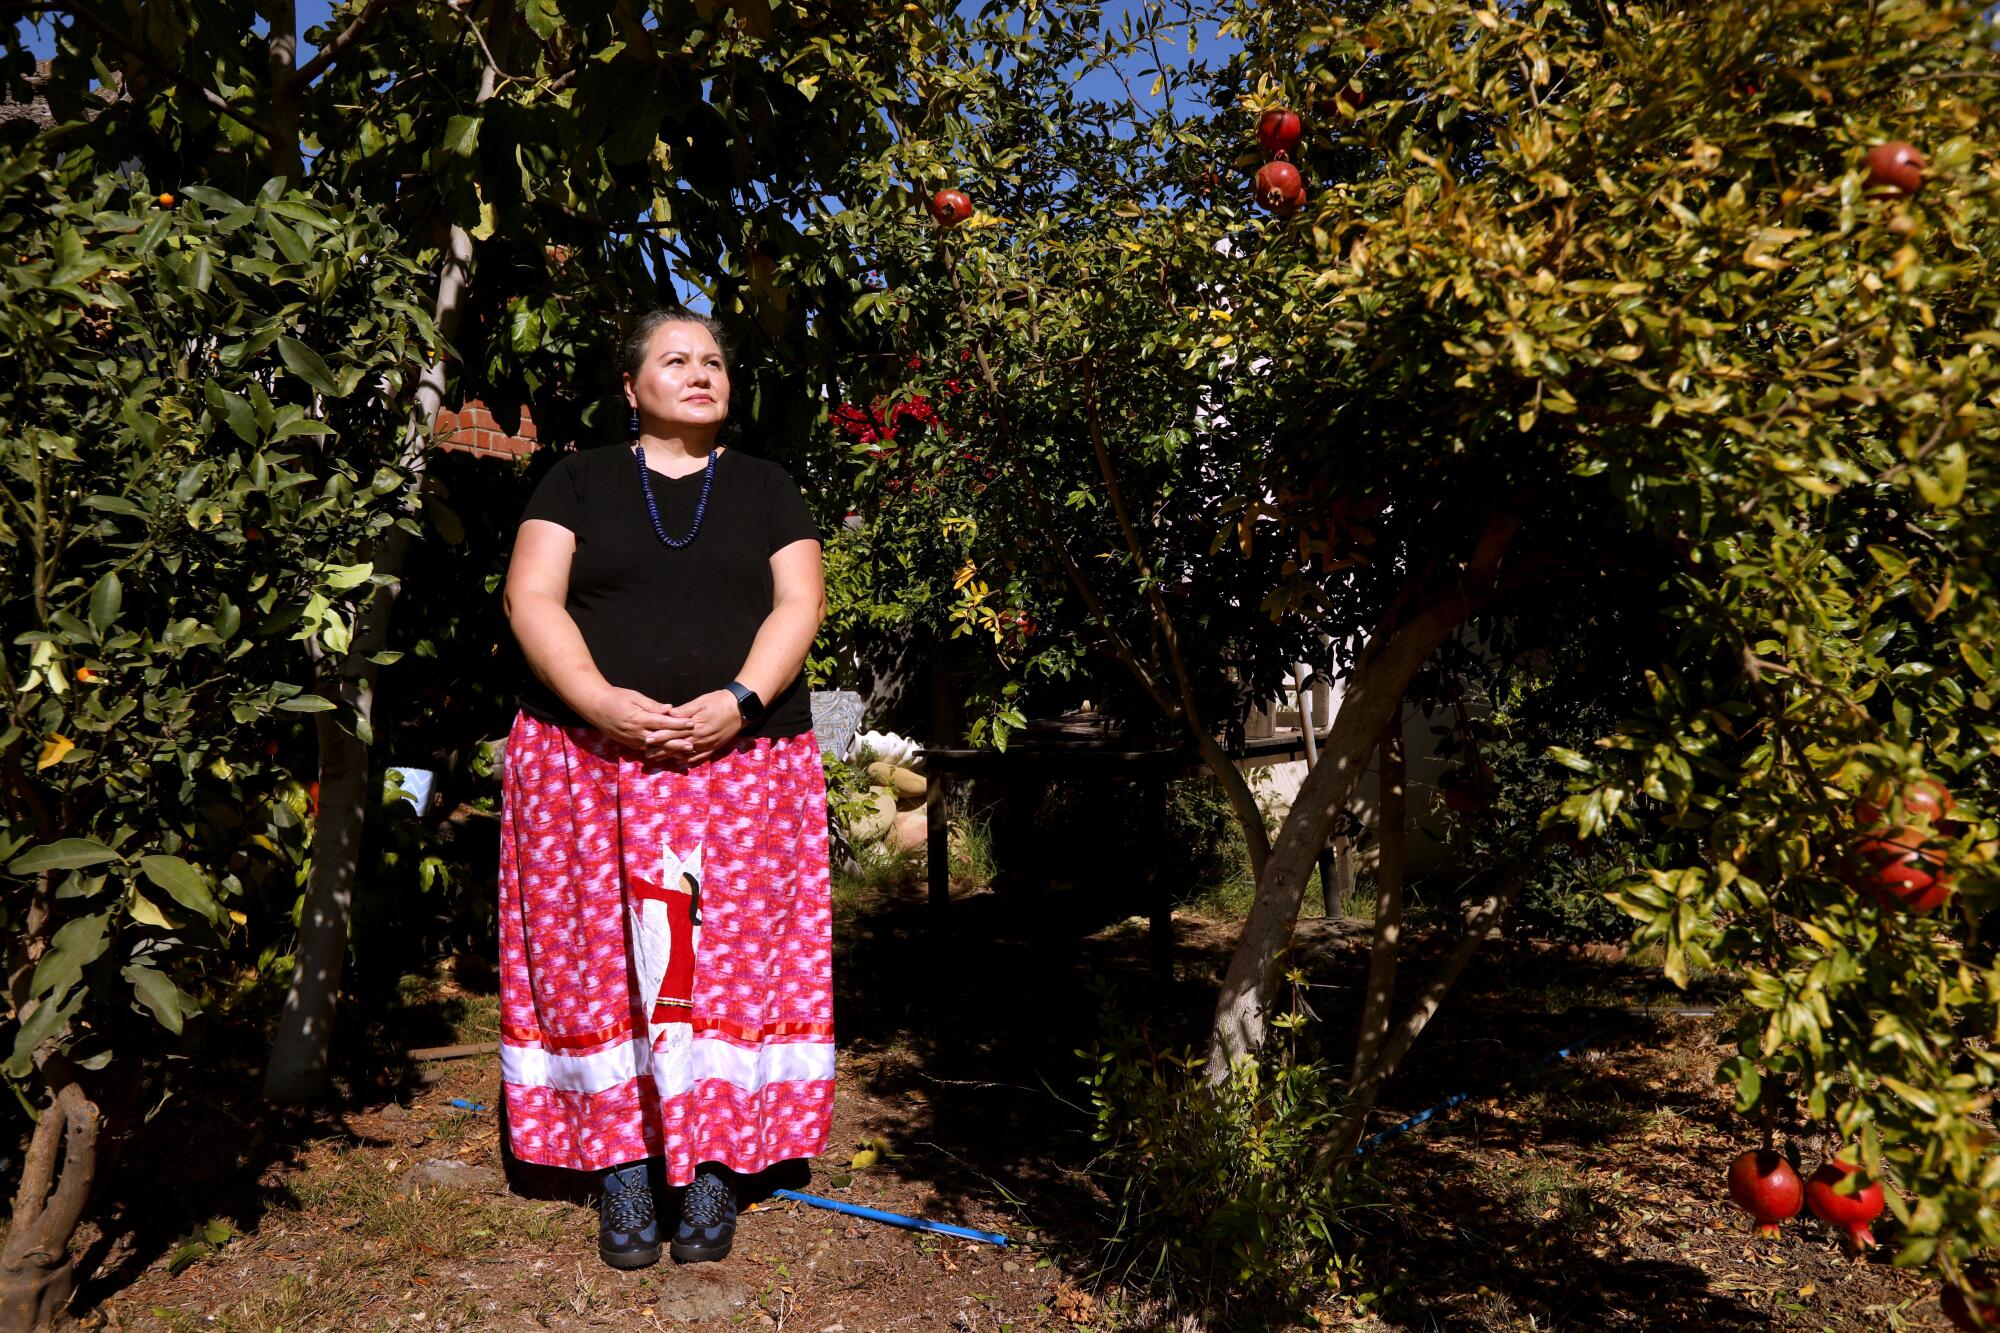  A woman in a black top and red-and-white patterned skirt stands near a pomegranate tree with hands clasped